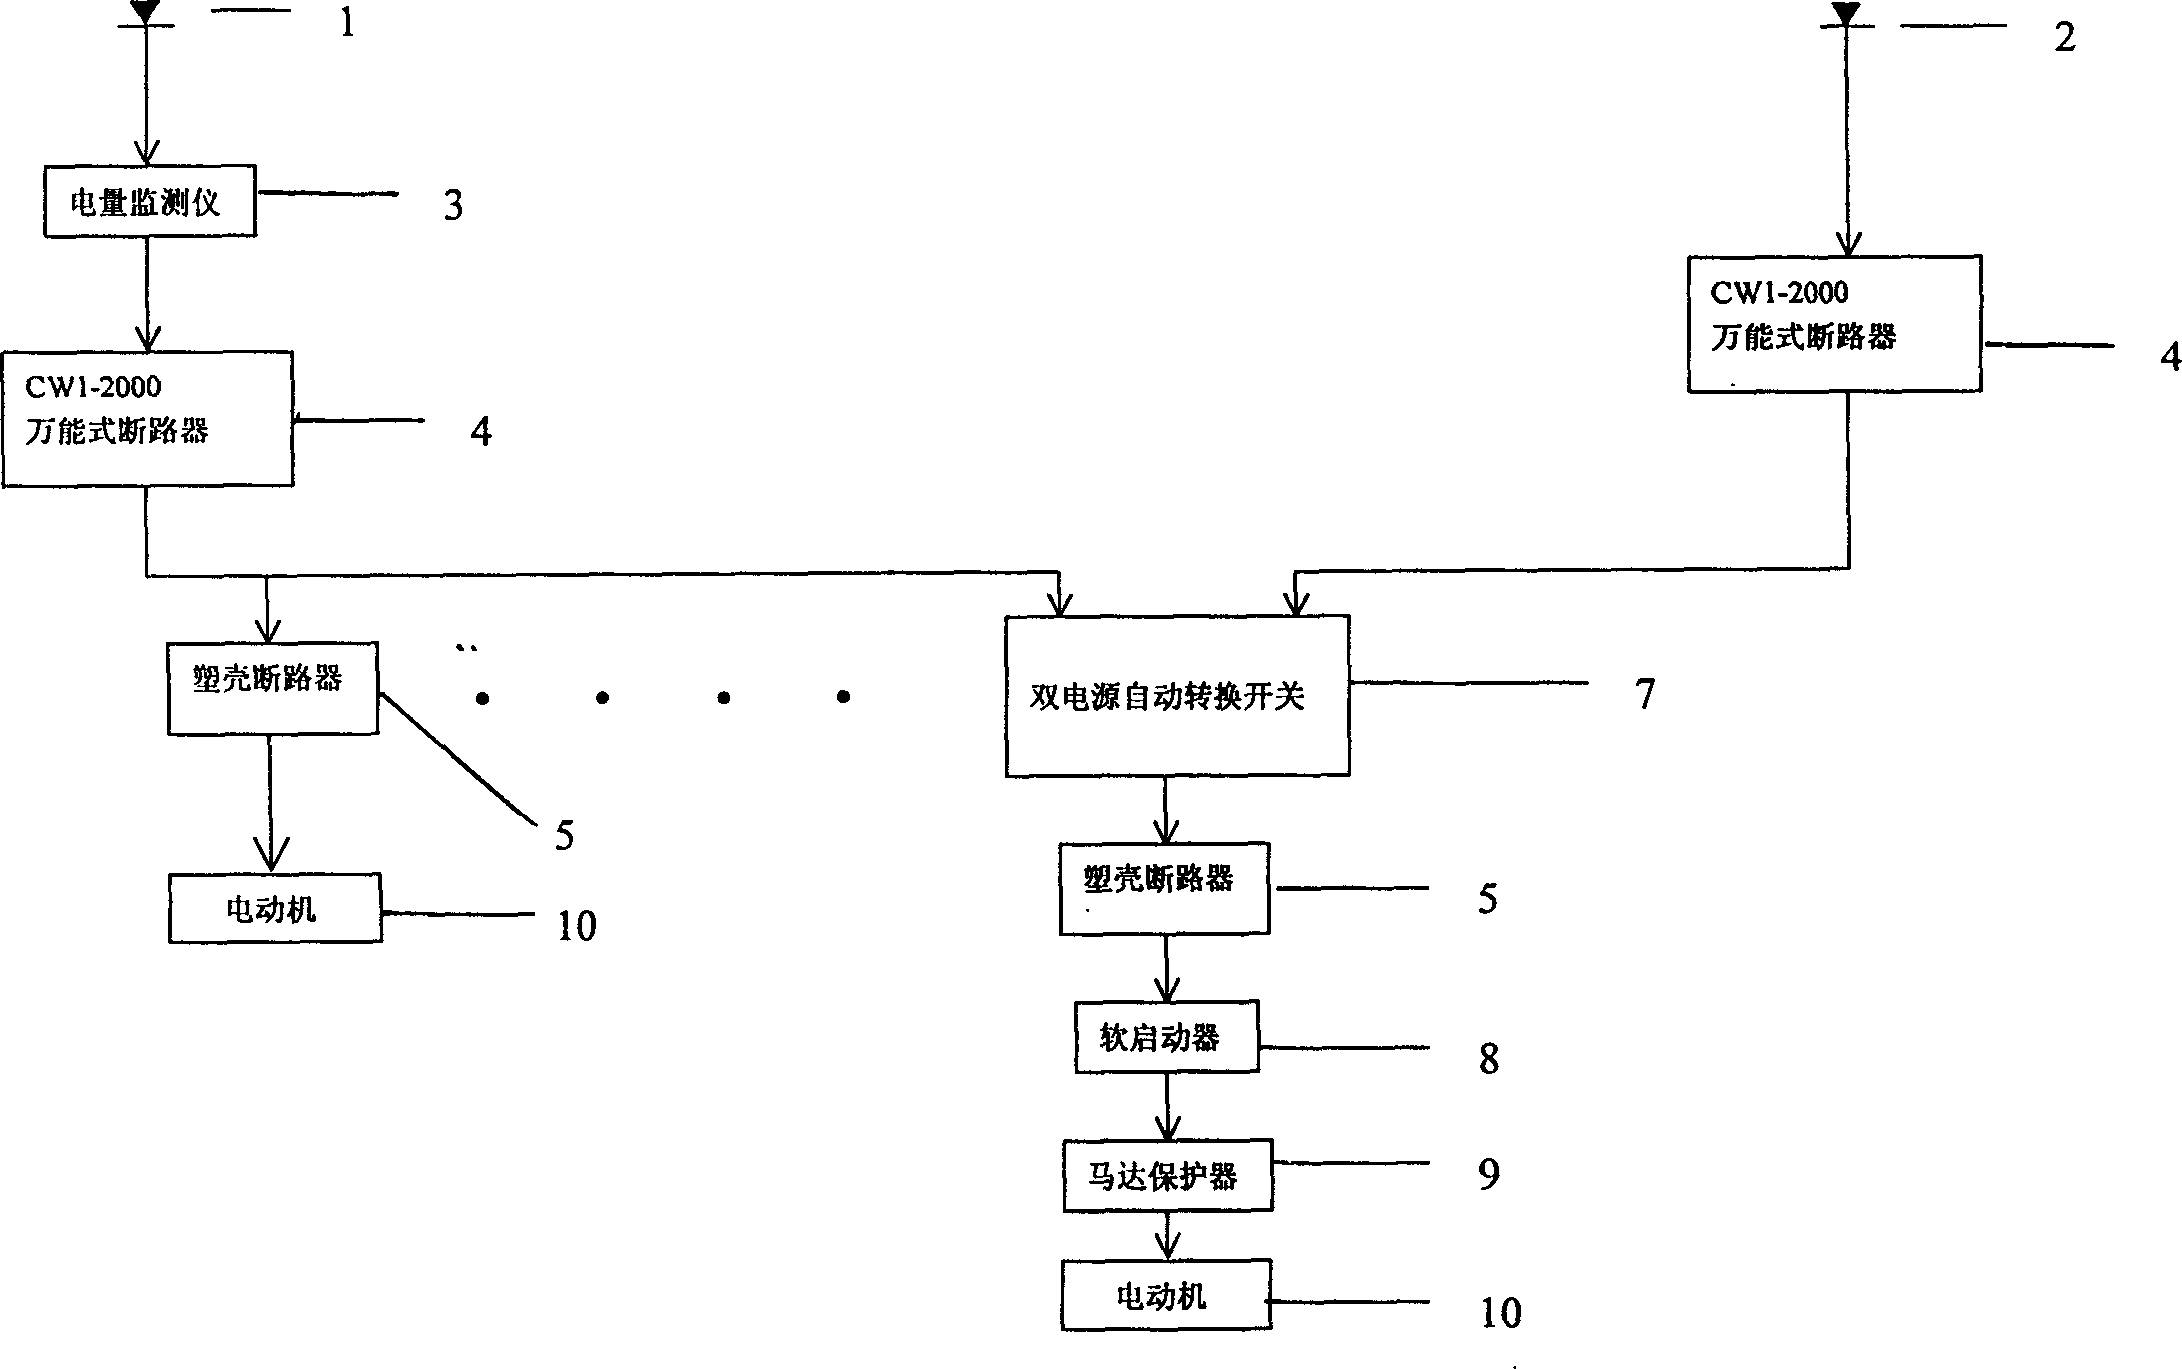 Intelligent network low-voltage distribution and control system using bus technique